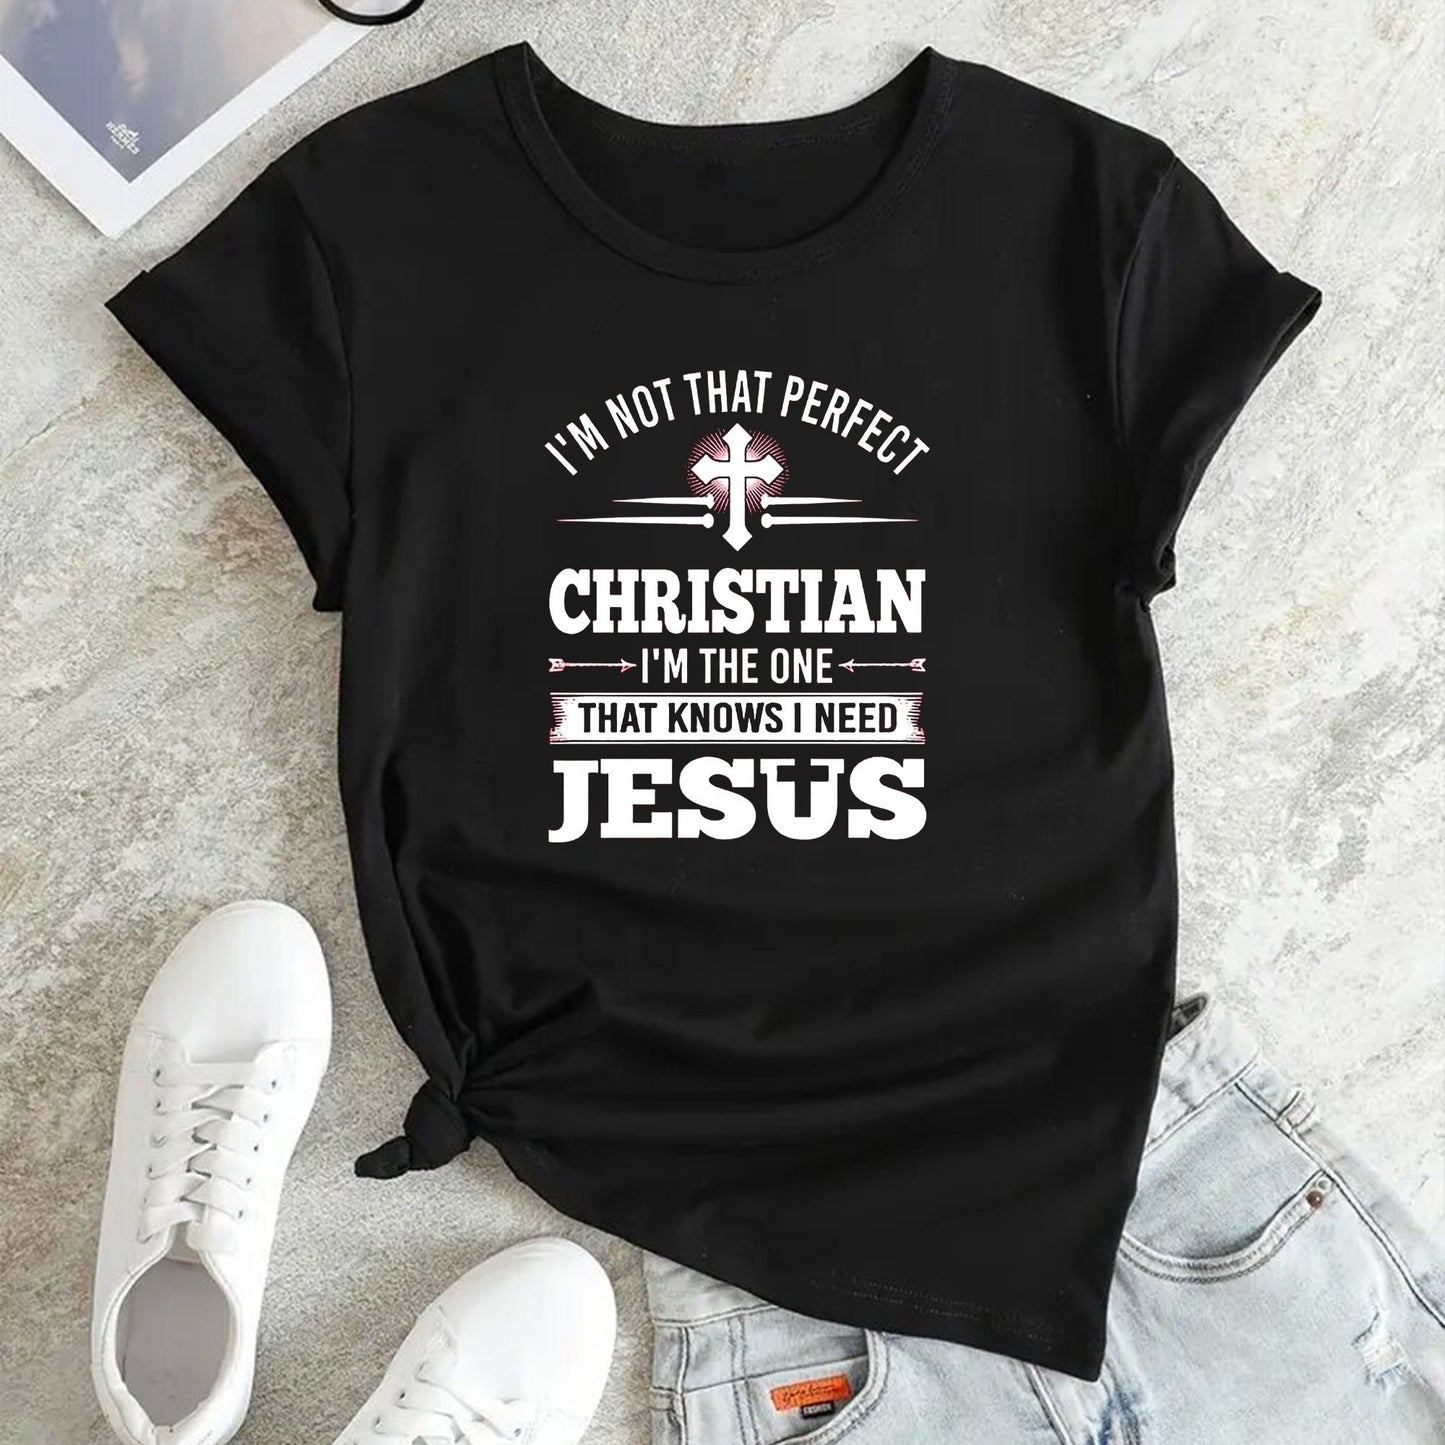 I'm Not That Perfect Christian I'm The One That Knows I Need Jesus Plus Size Women's Christian T-shirt claimedbygoddesigns